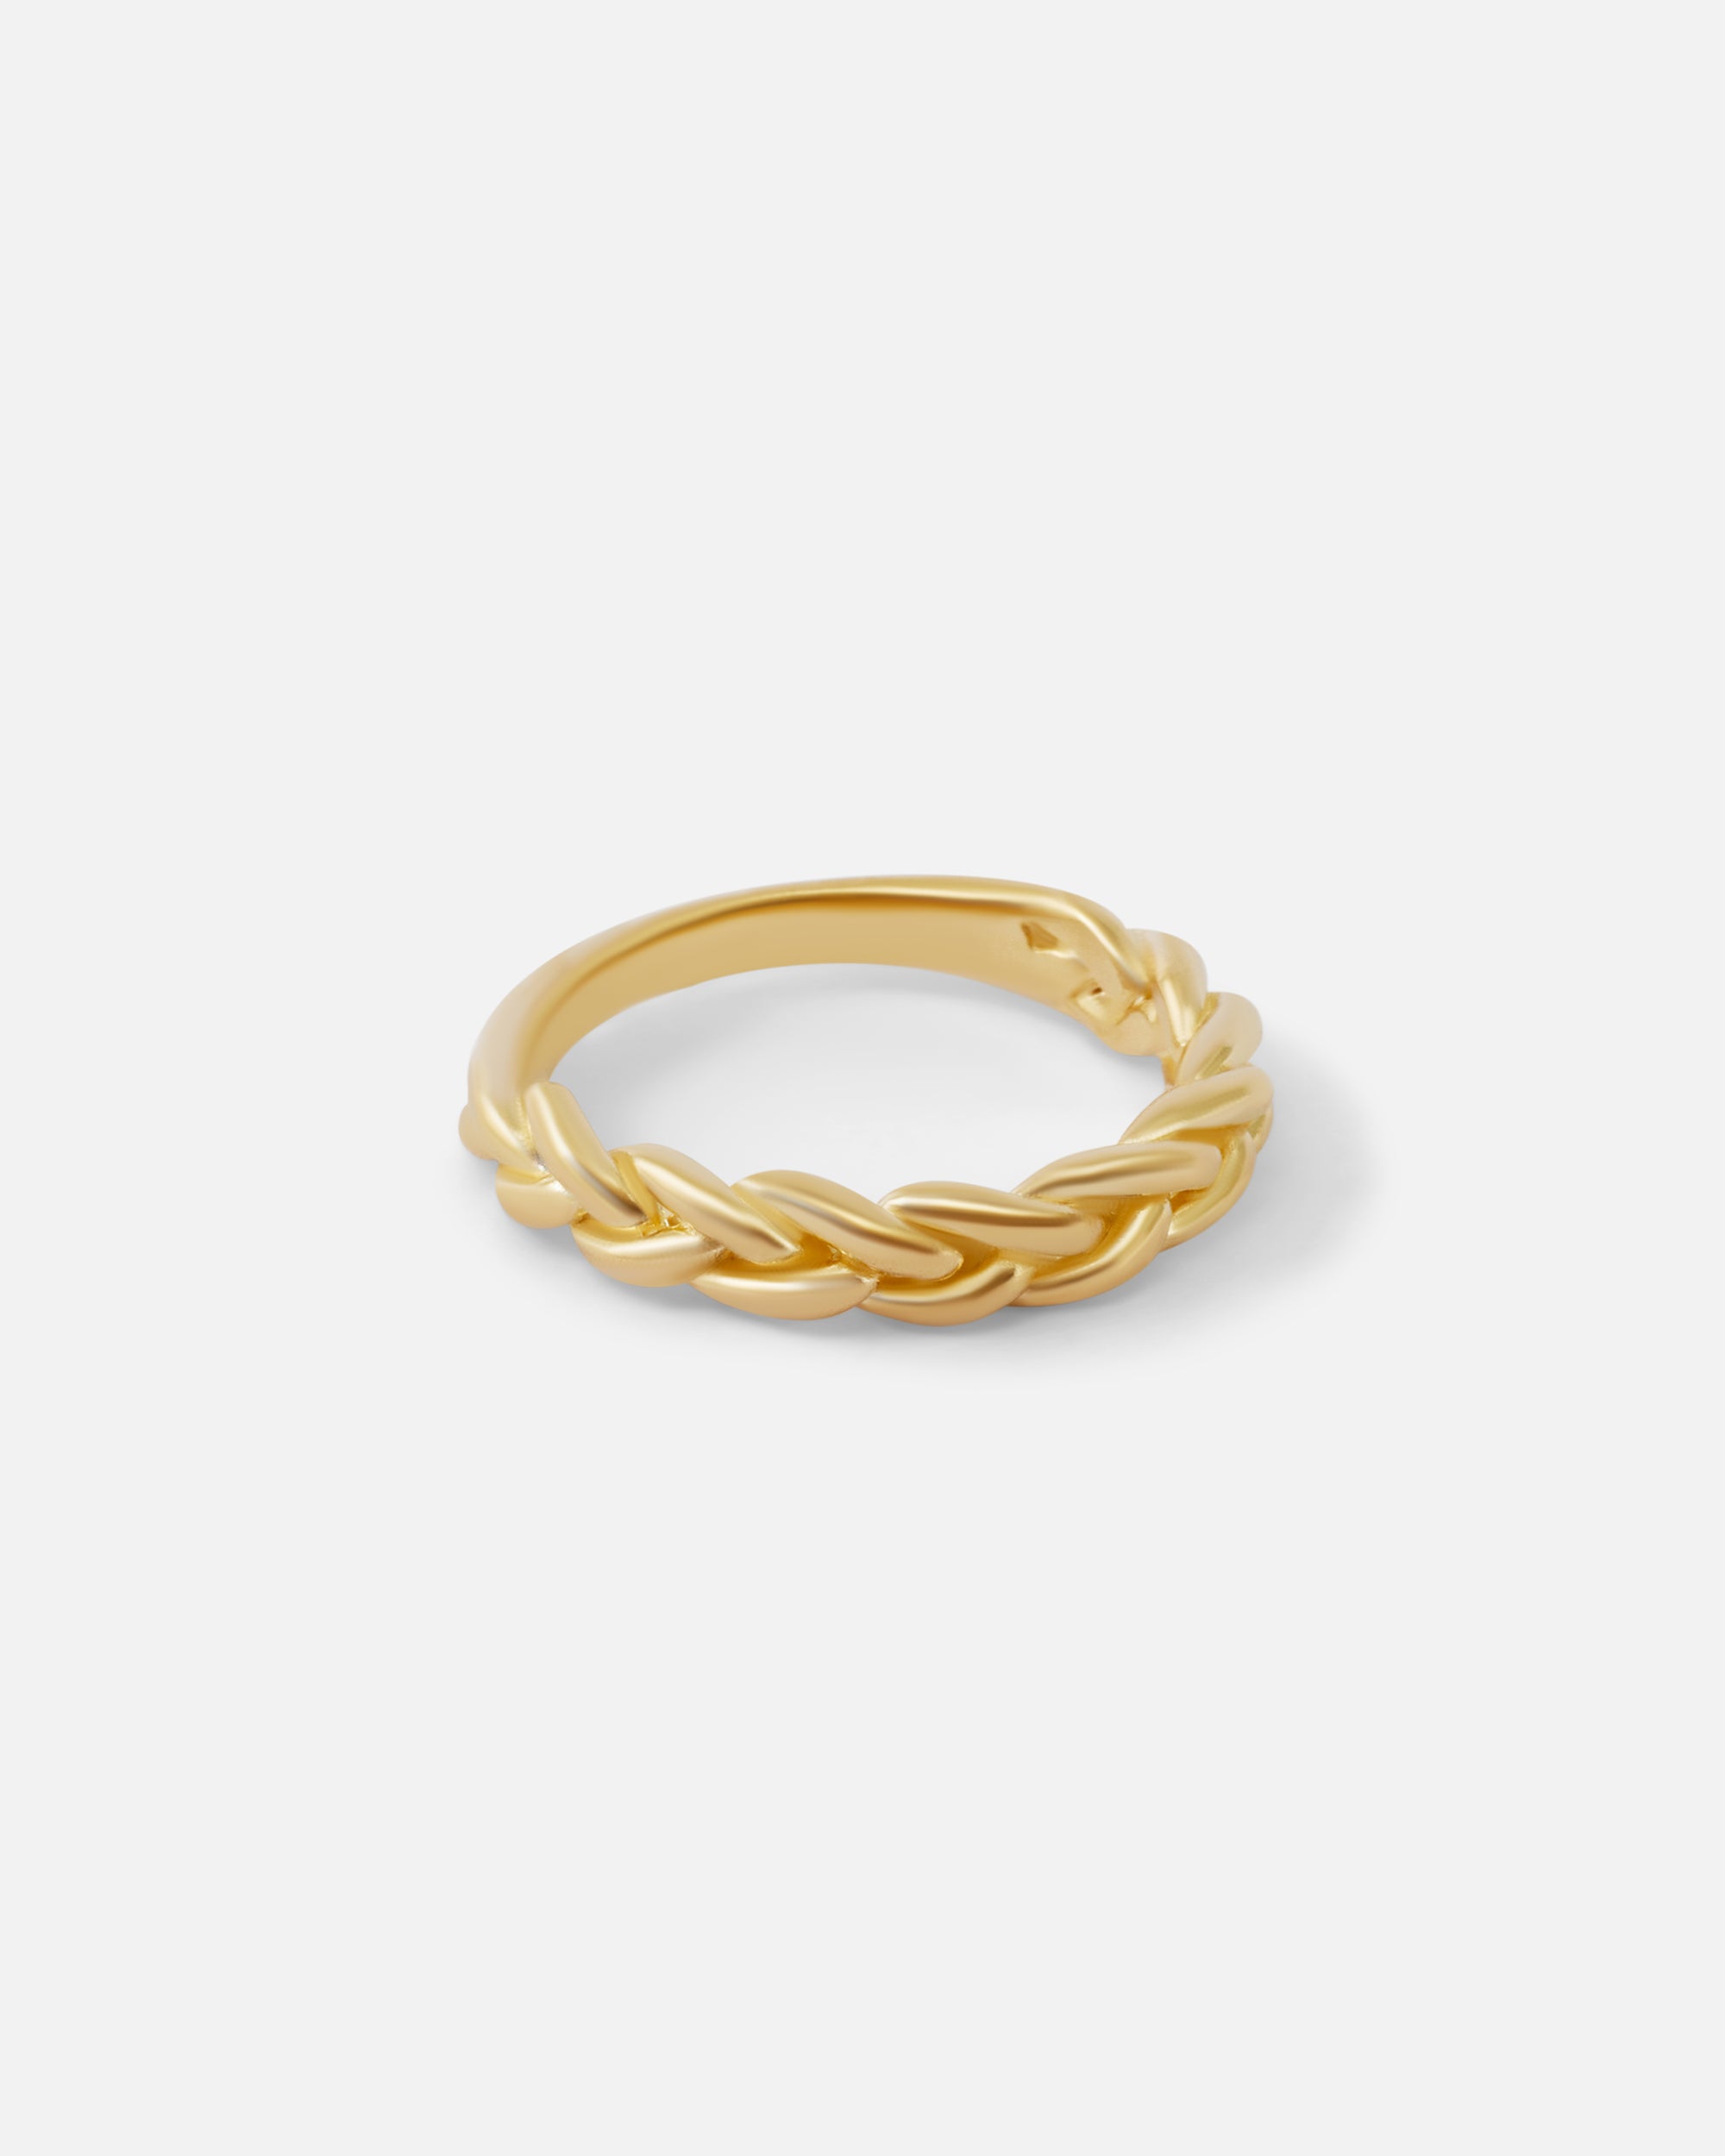 Gradus / Ring By Alfonzo in Wedding Bands Category